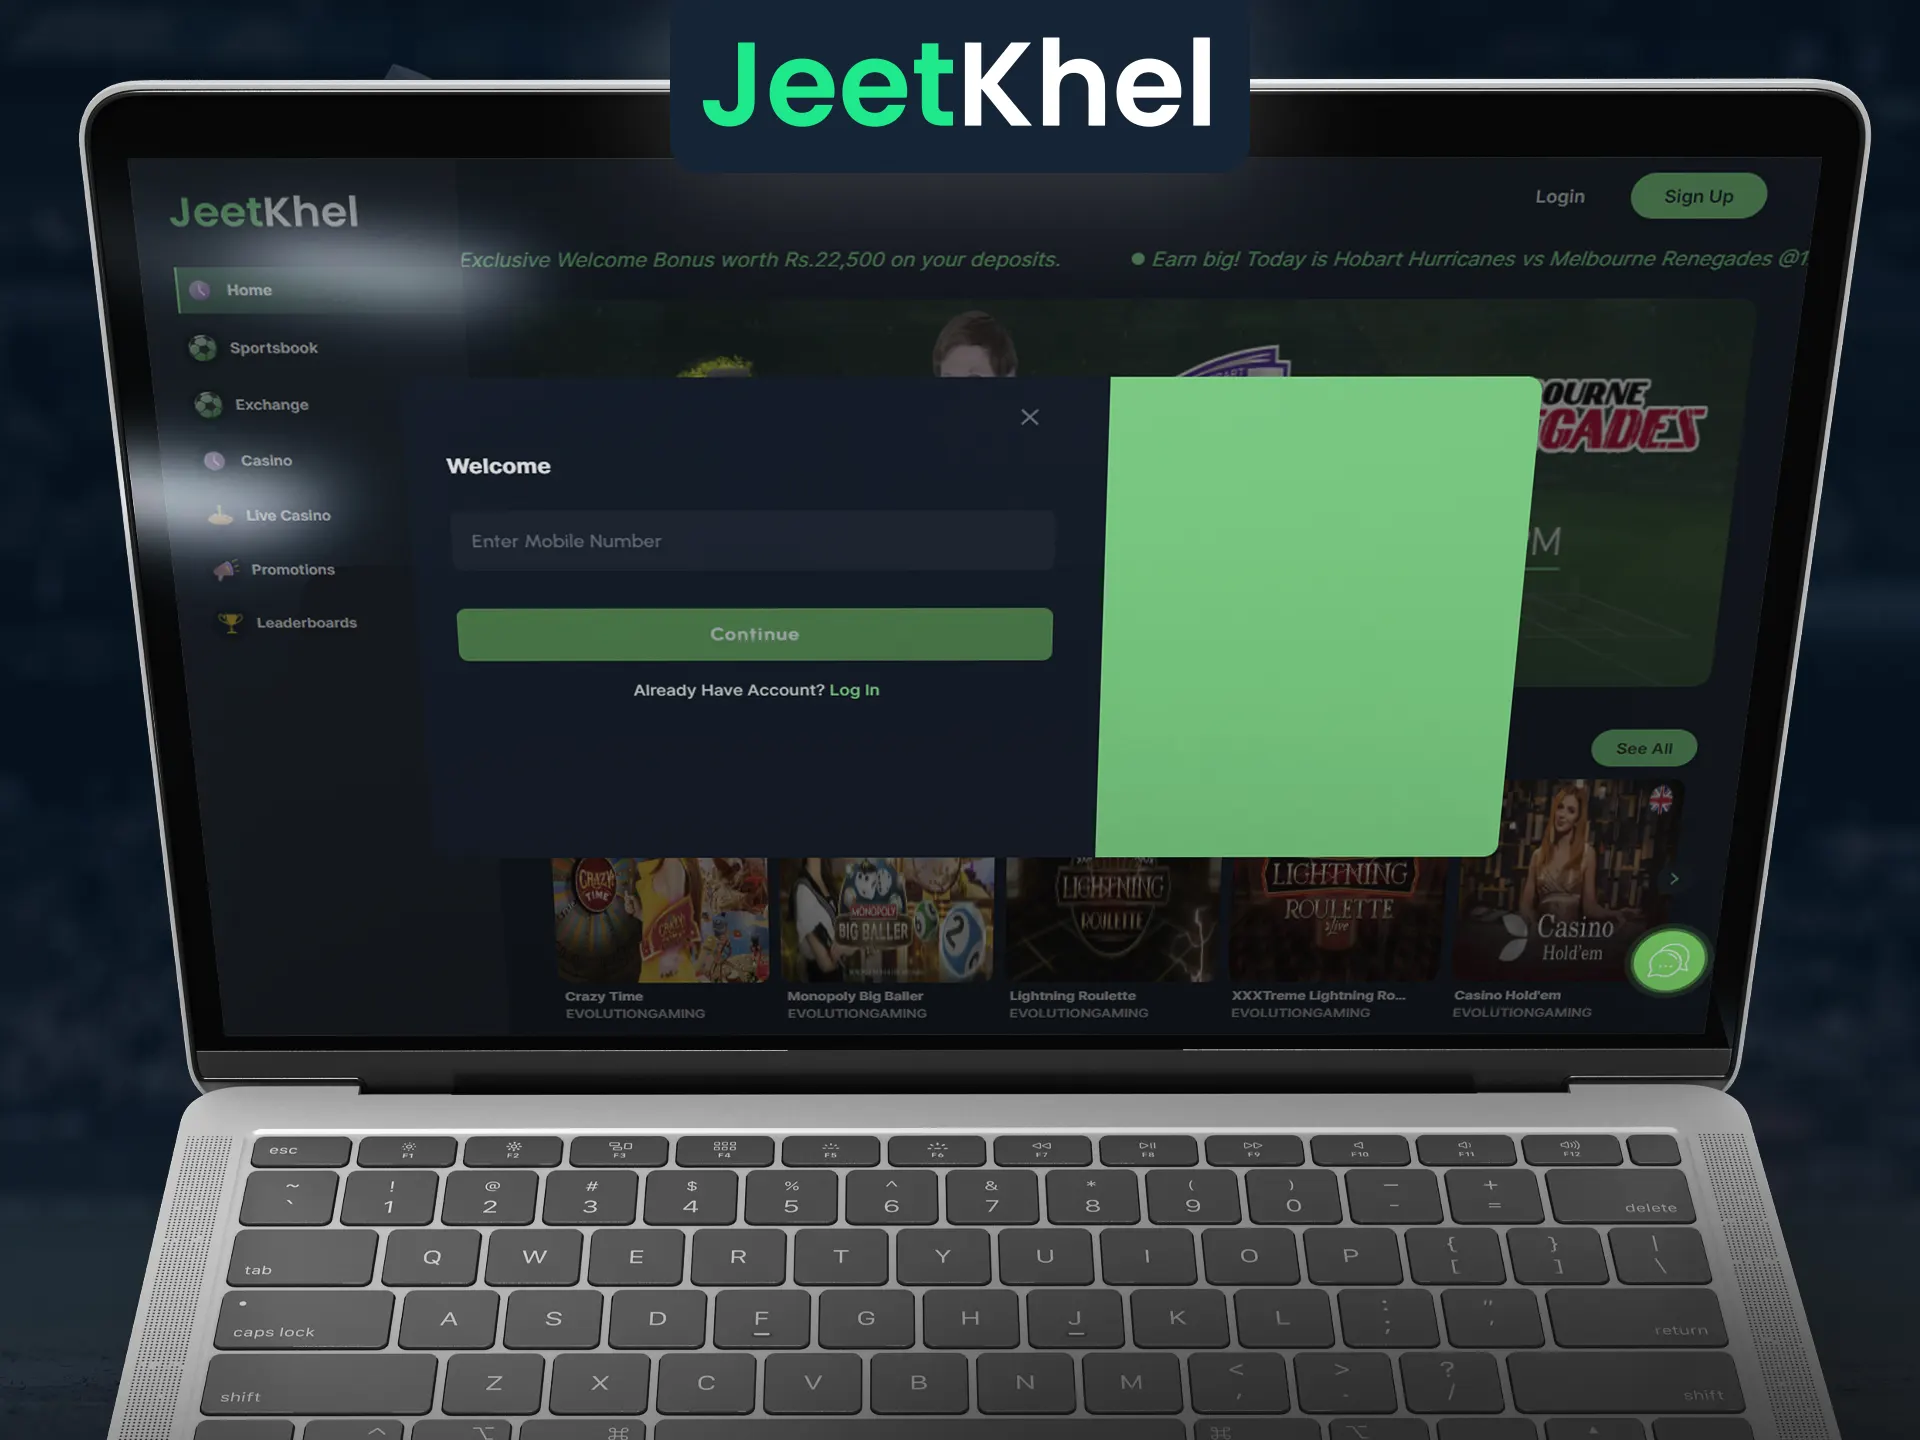 The registration process on Jeetkhel is easy and simple.